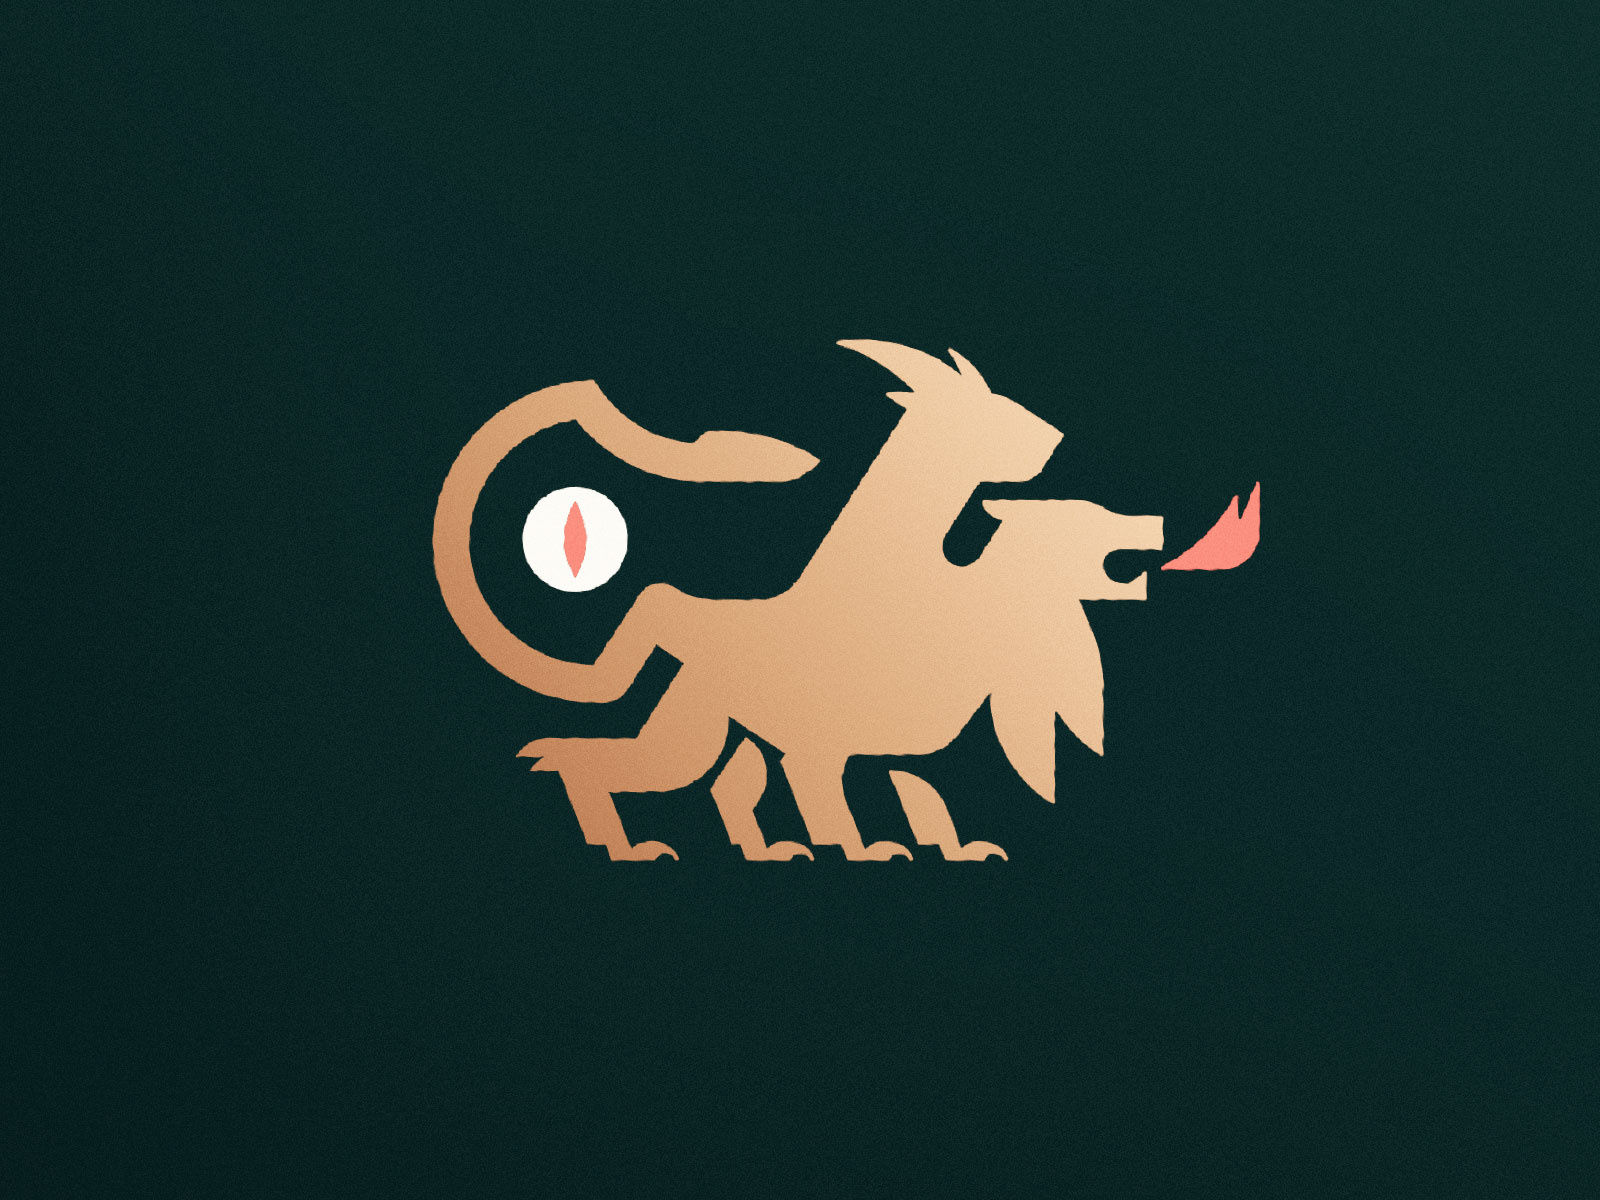 Chimera Dungeons & Dragons by Peter Giuffria PGCREATES on Dribbble